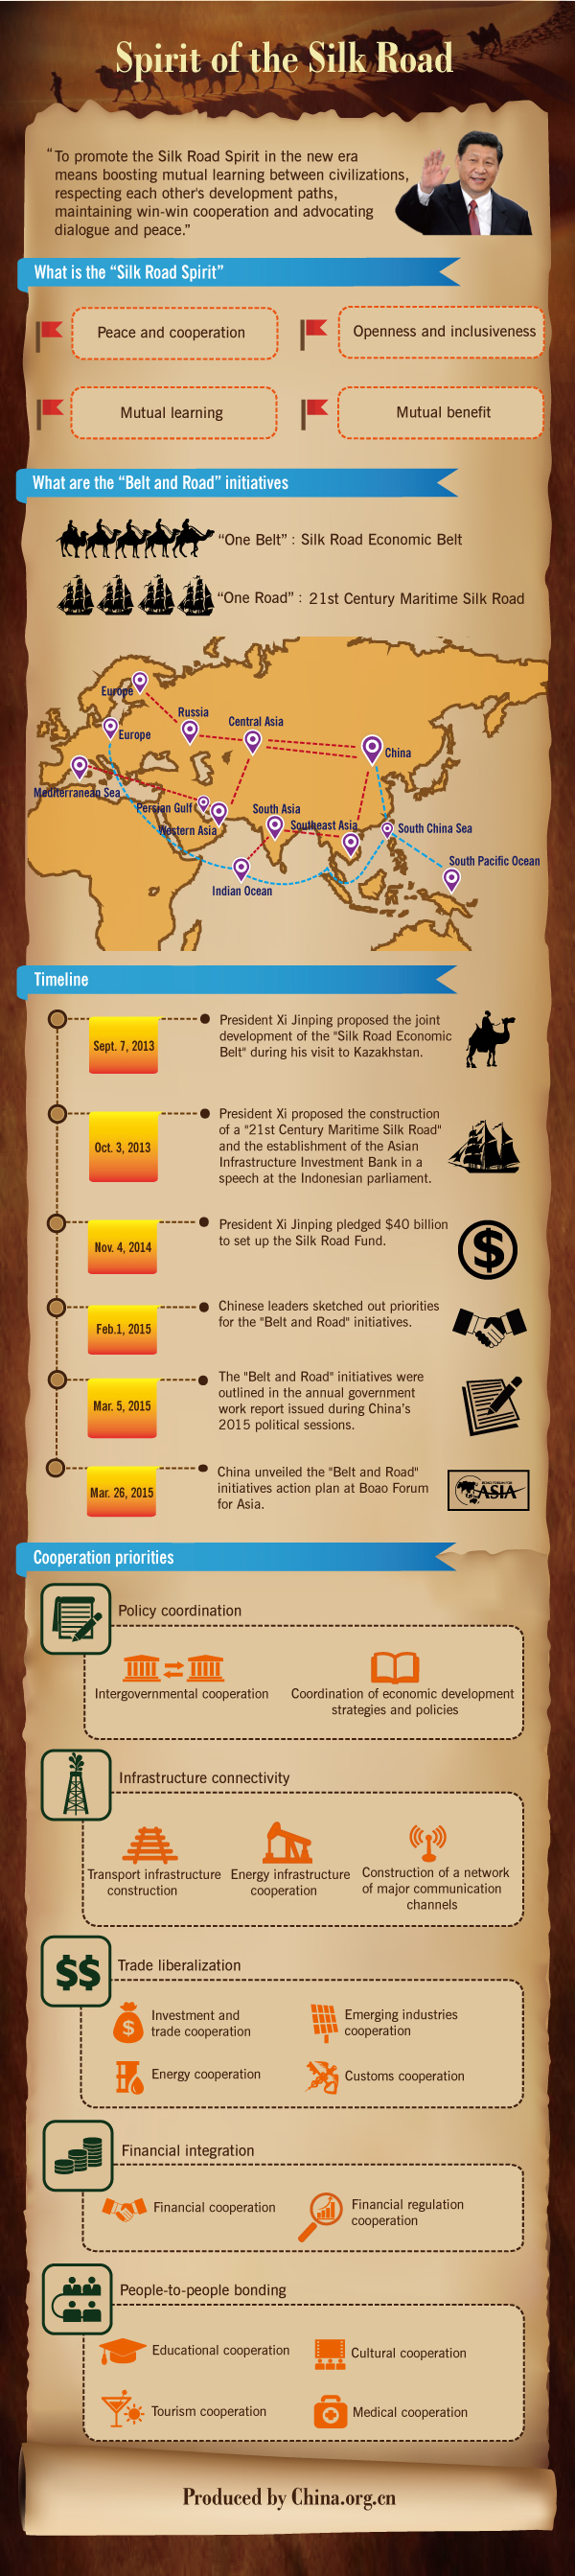 Infographic: Spirit of the Silk Road 